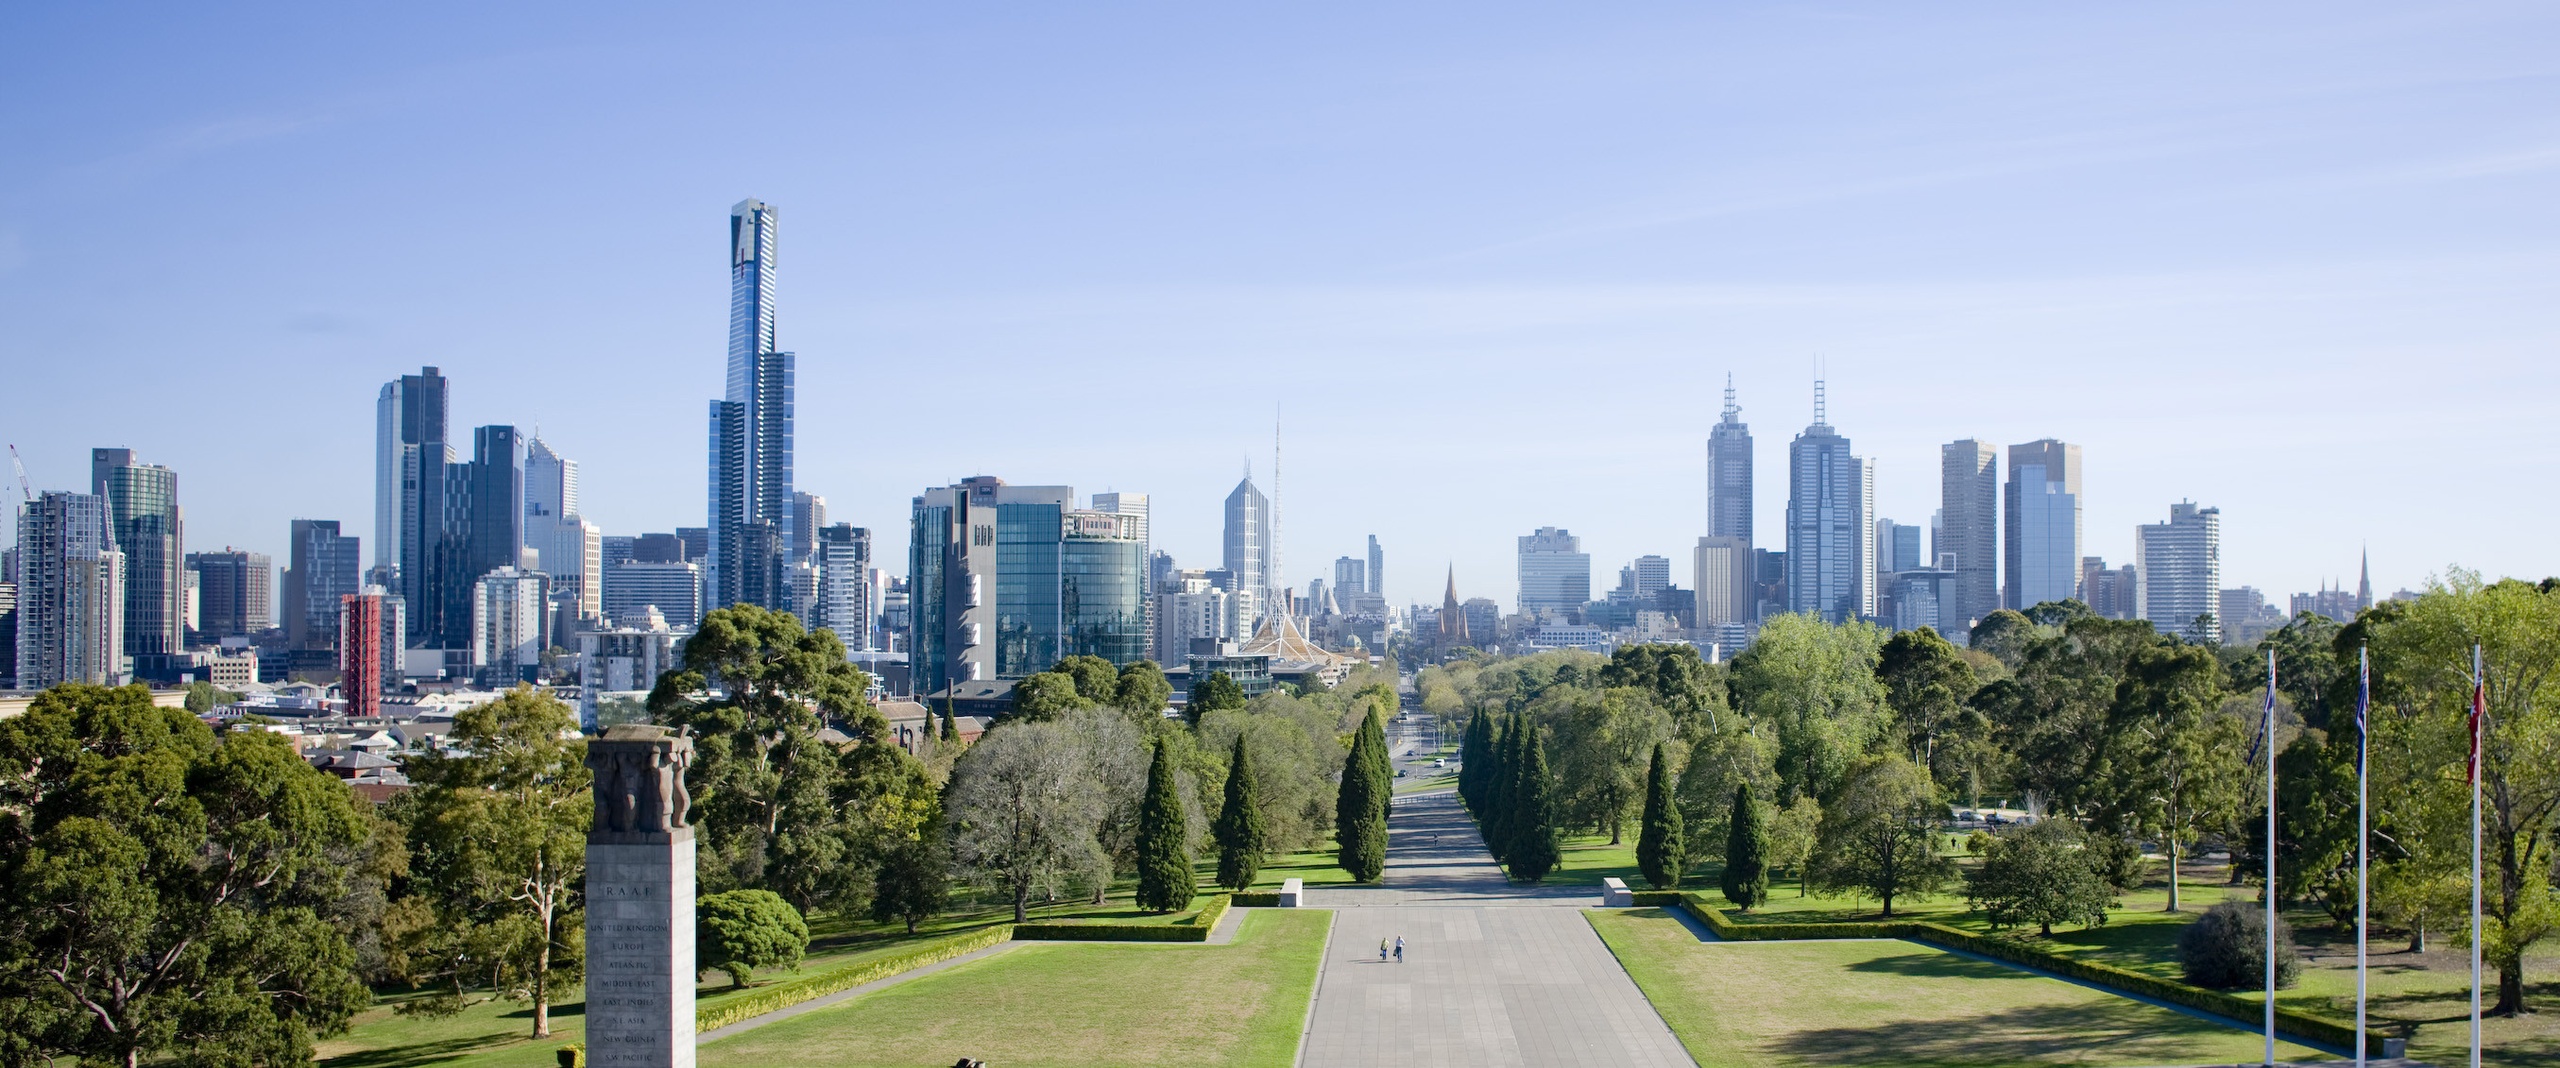 3.5-Hour Melbourne City Discovery Tour to Explore the City's Culture and History 